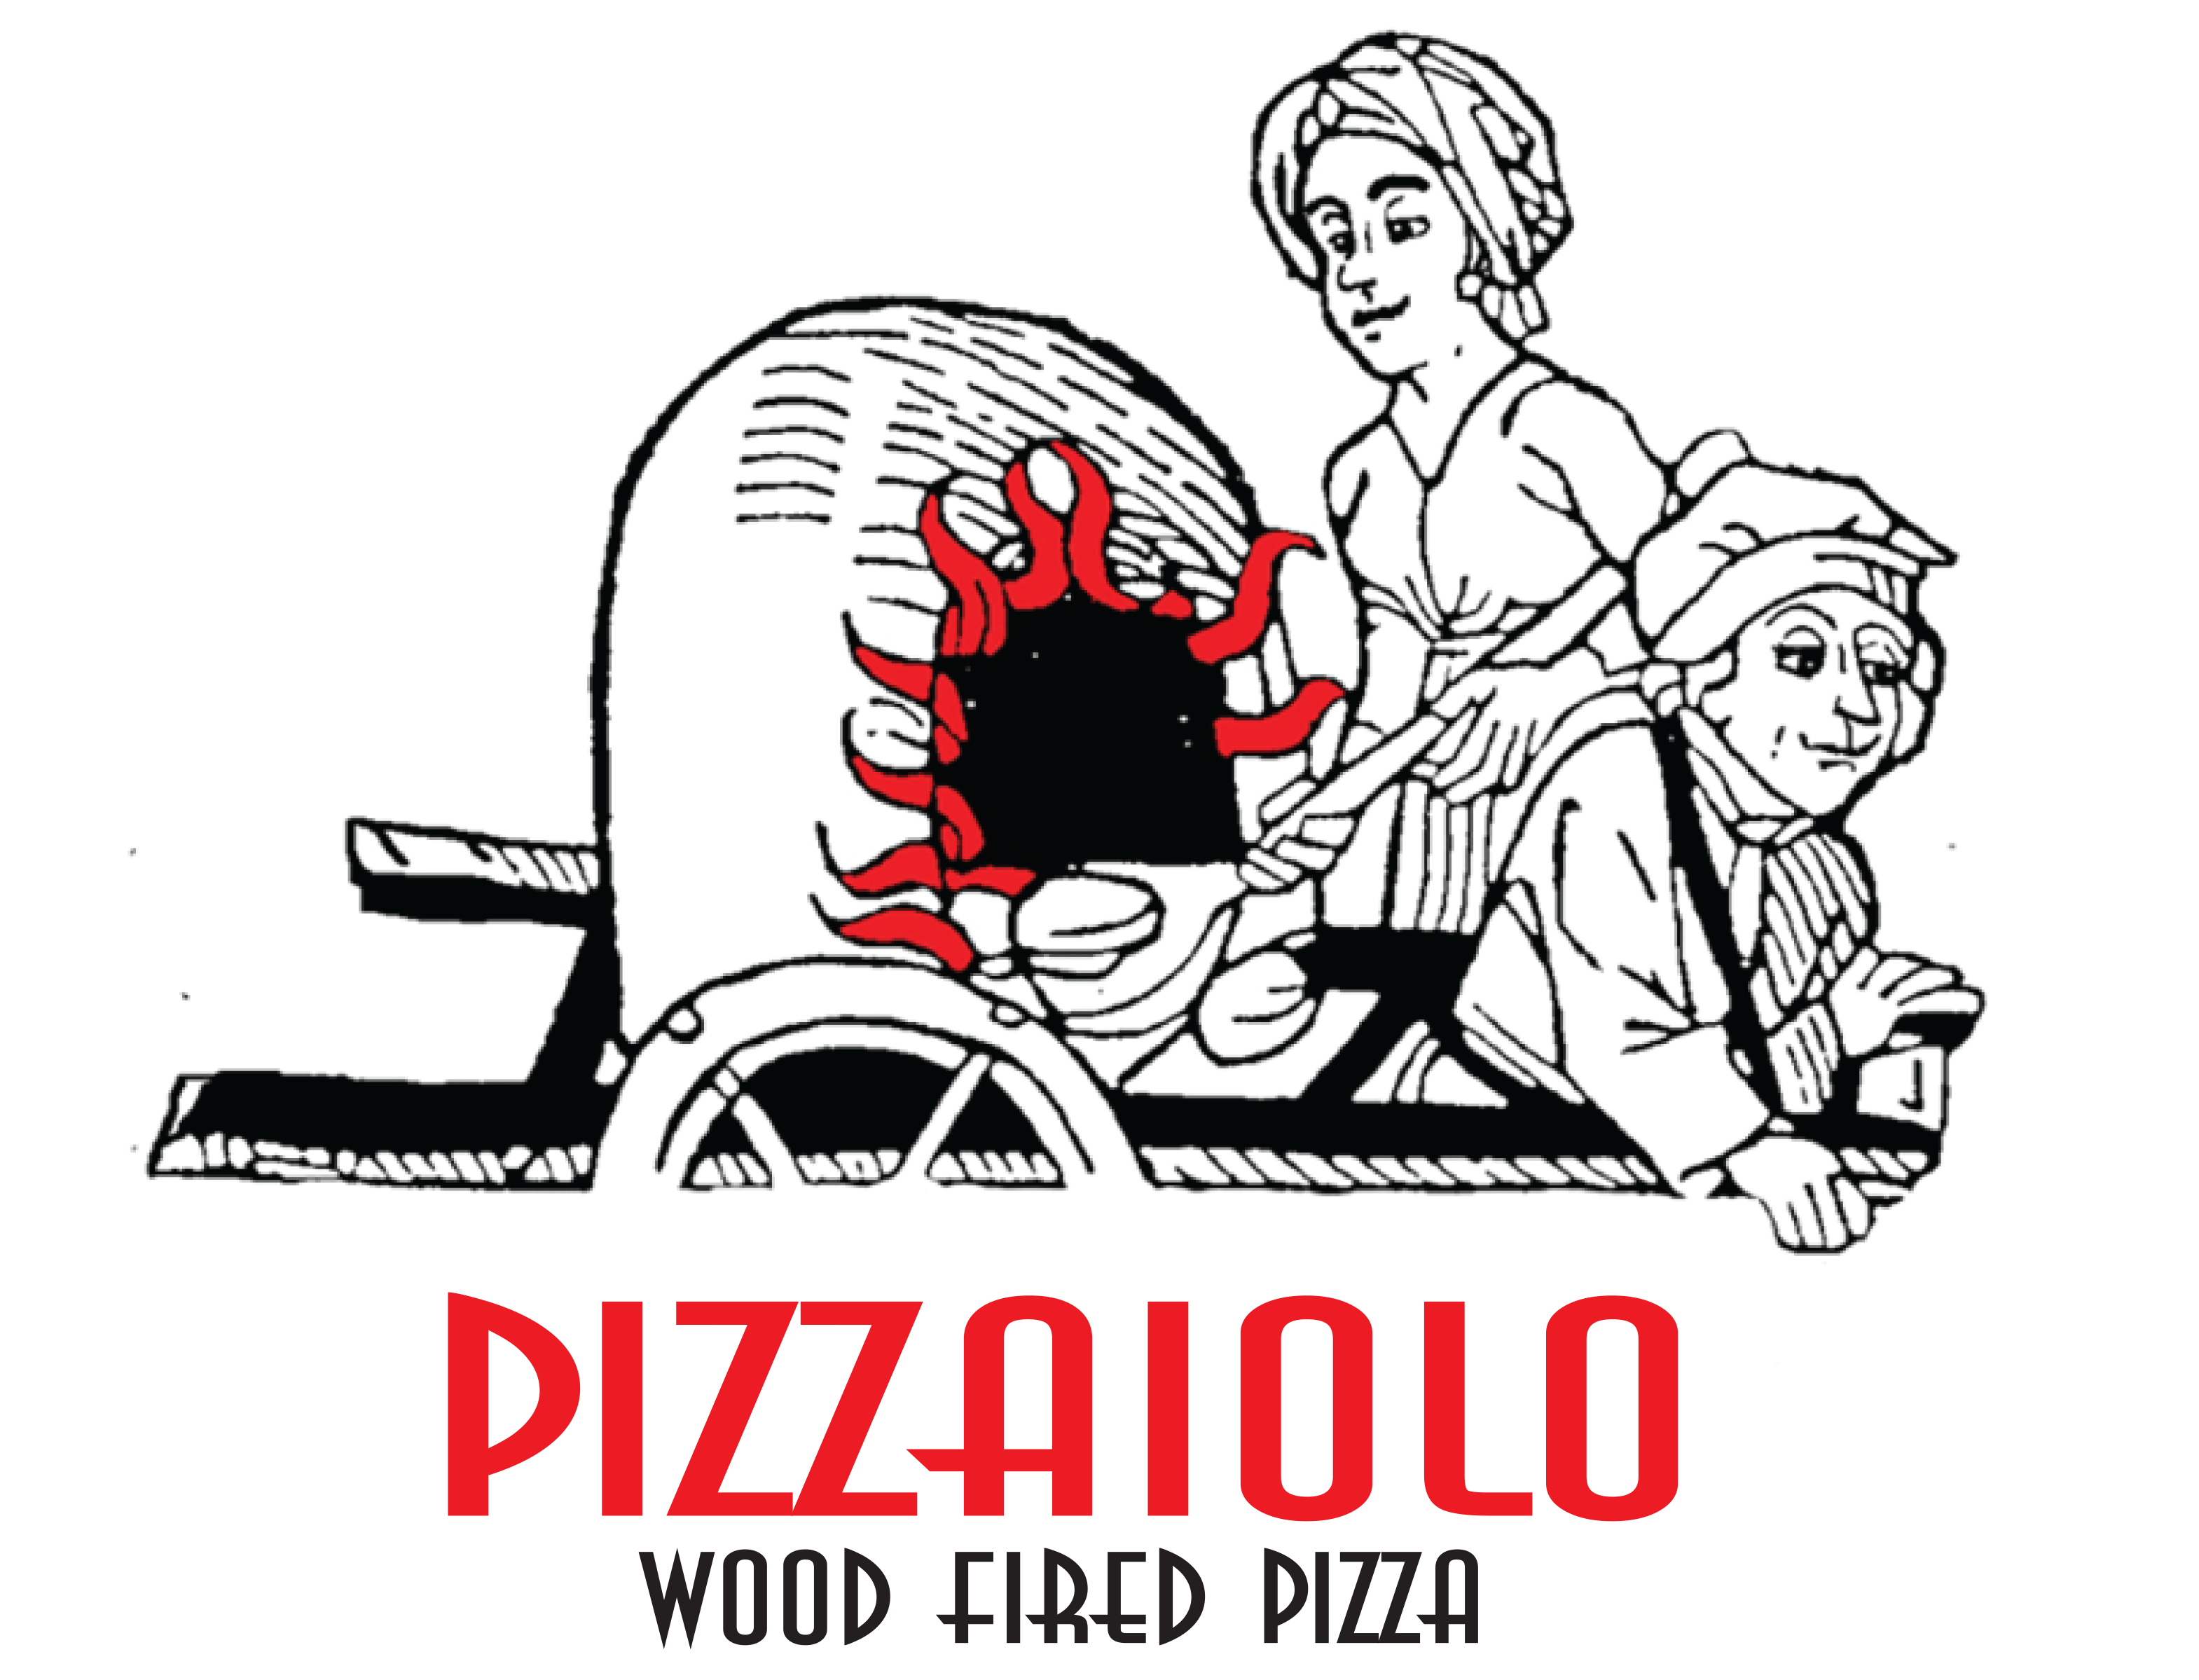 Pizzaiolo Woodfired Pizza